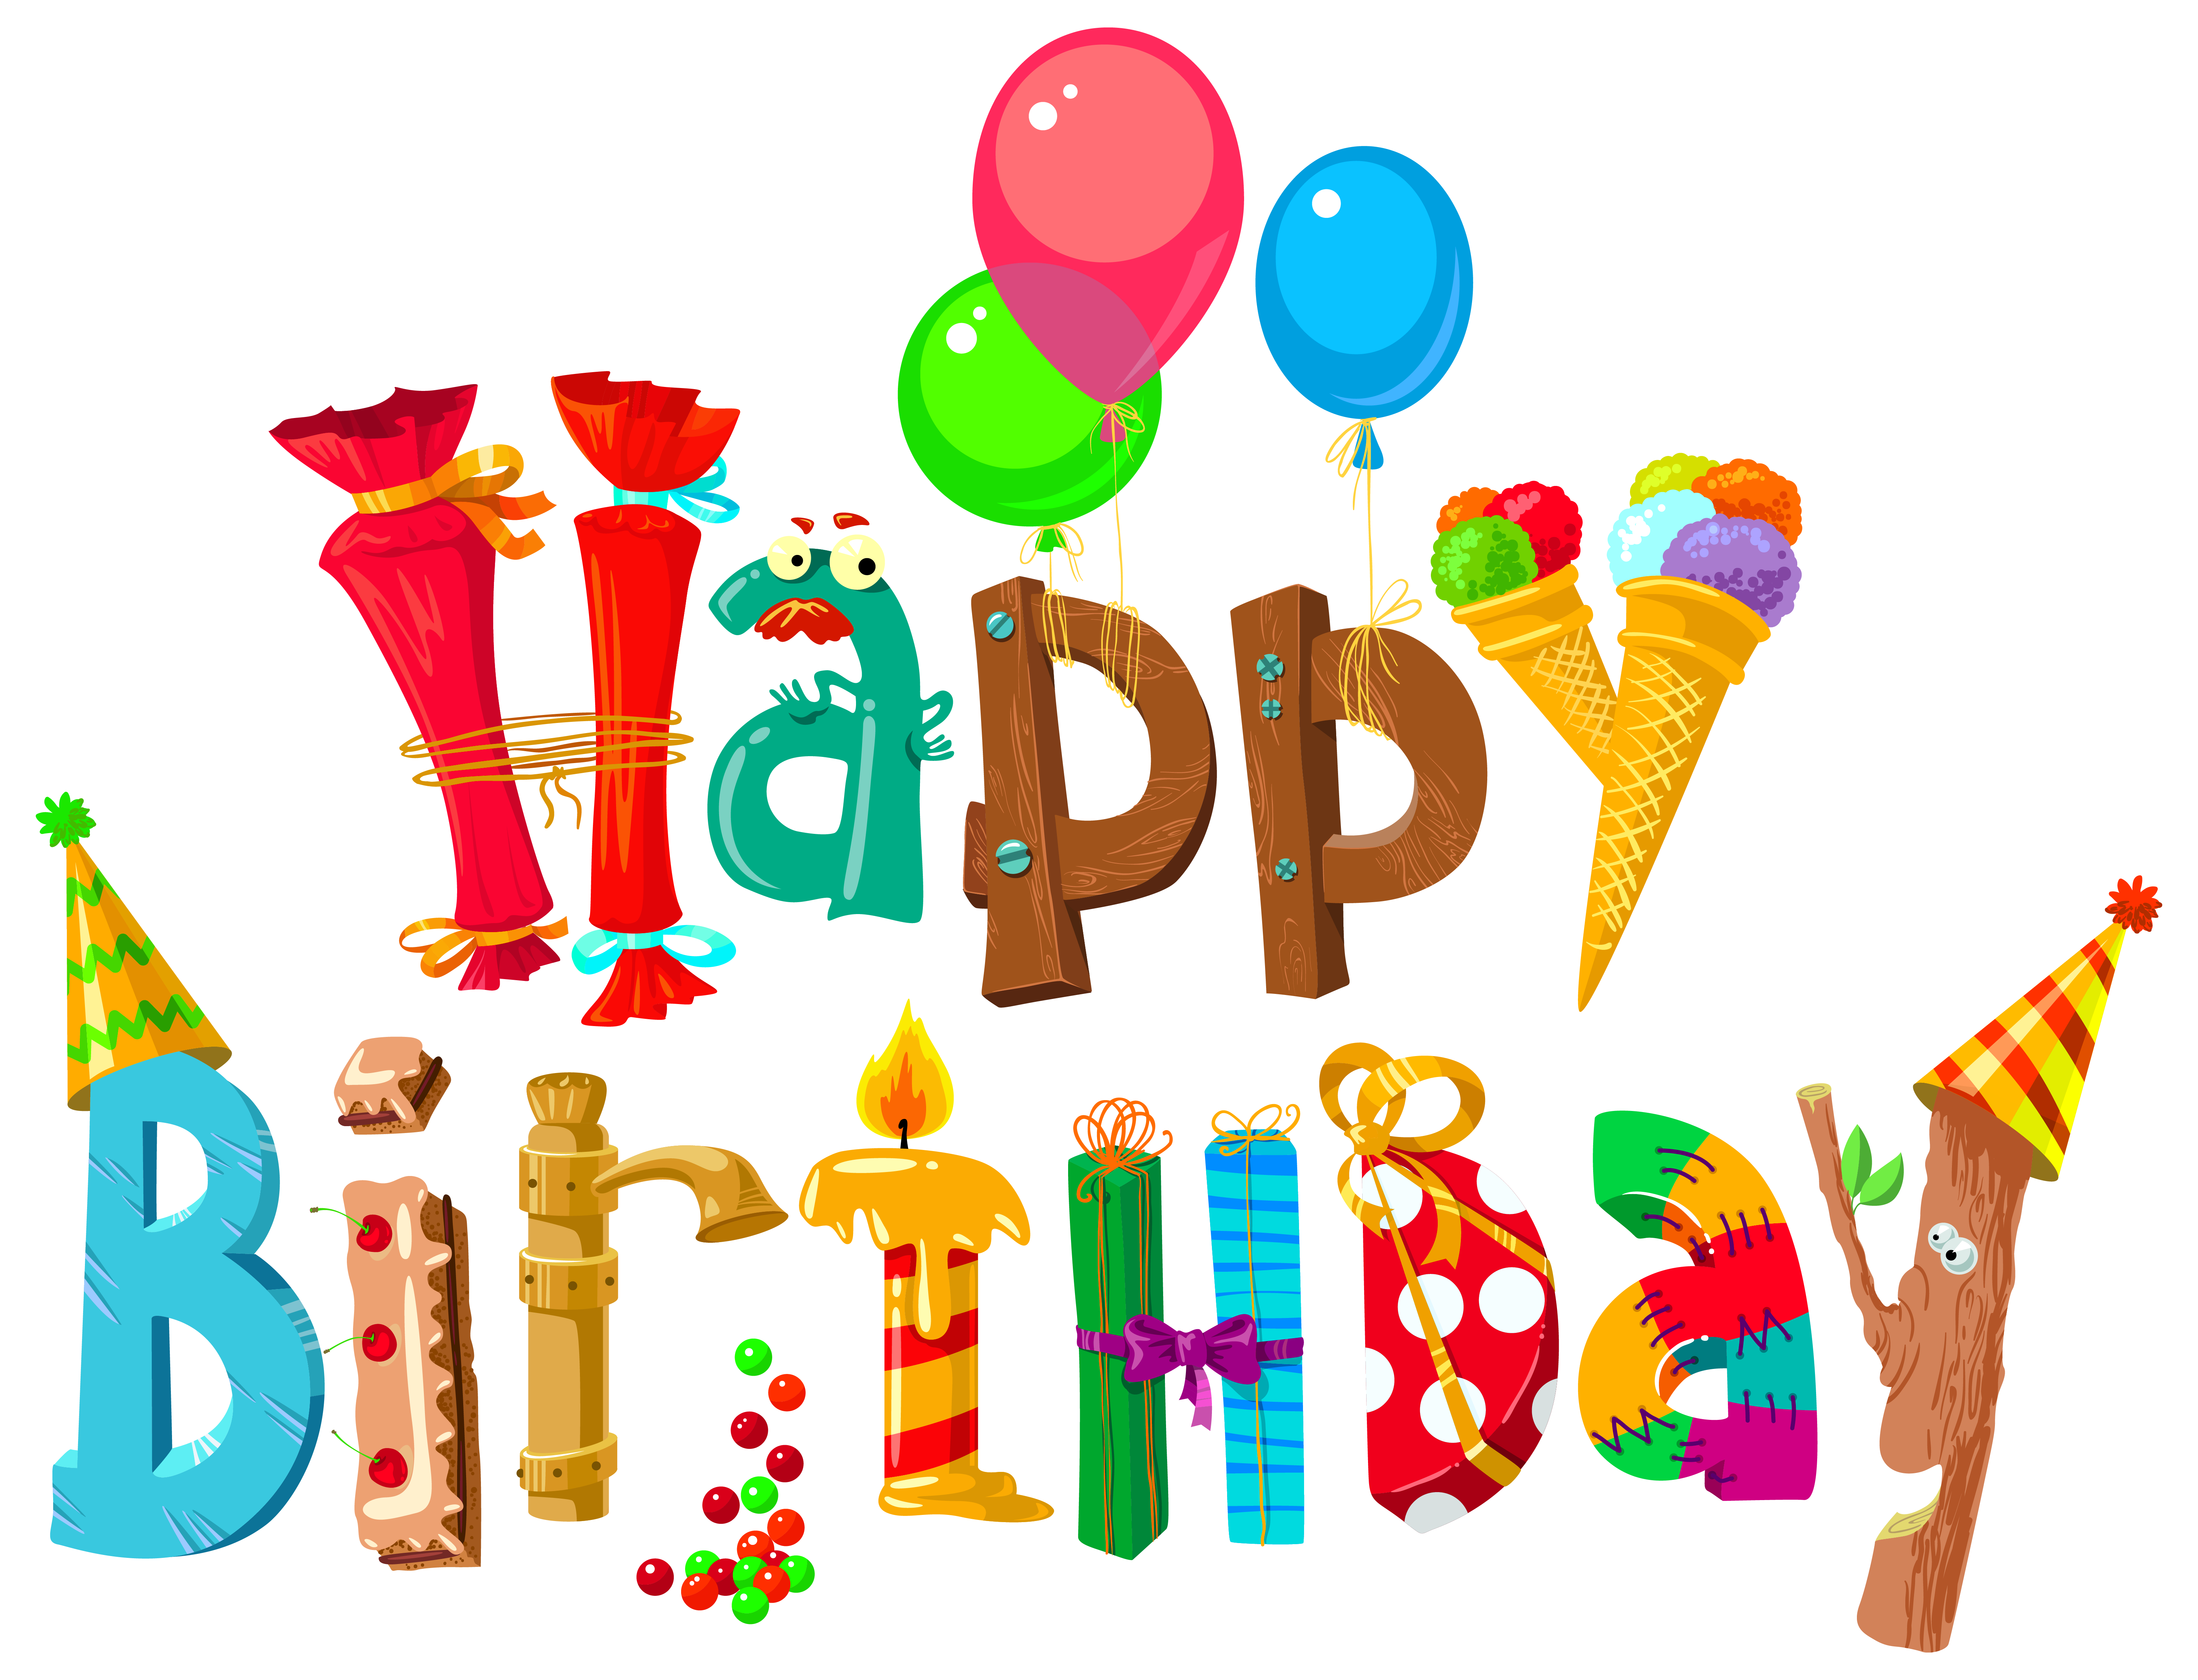 Funny happy birthday image. Excited clipart surprise present